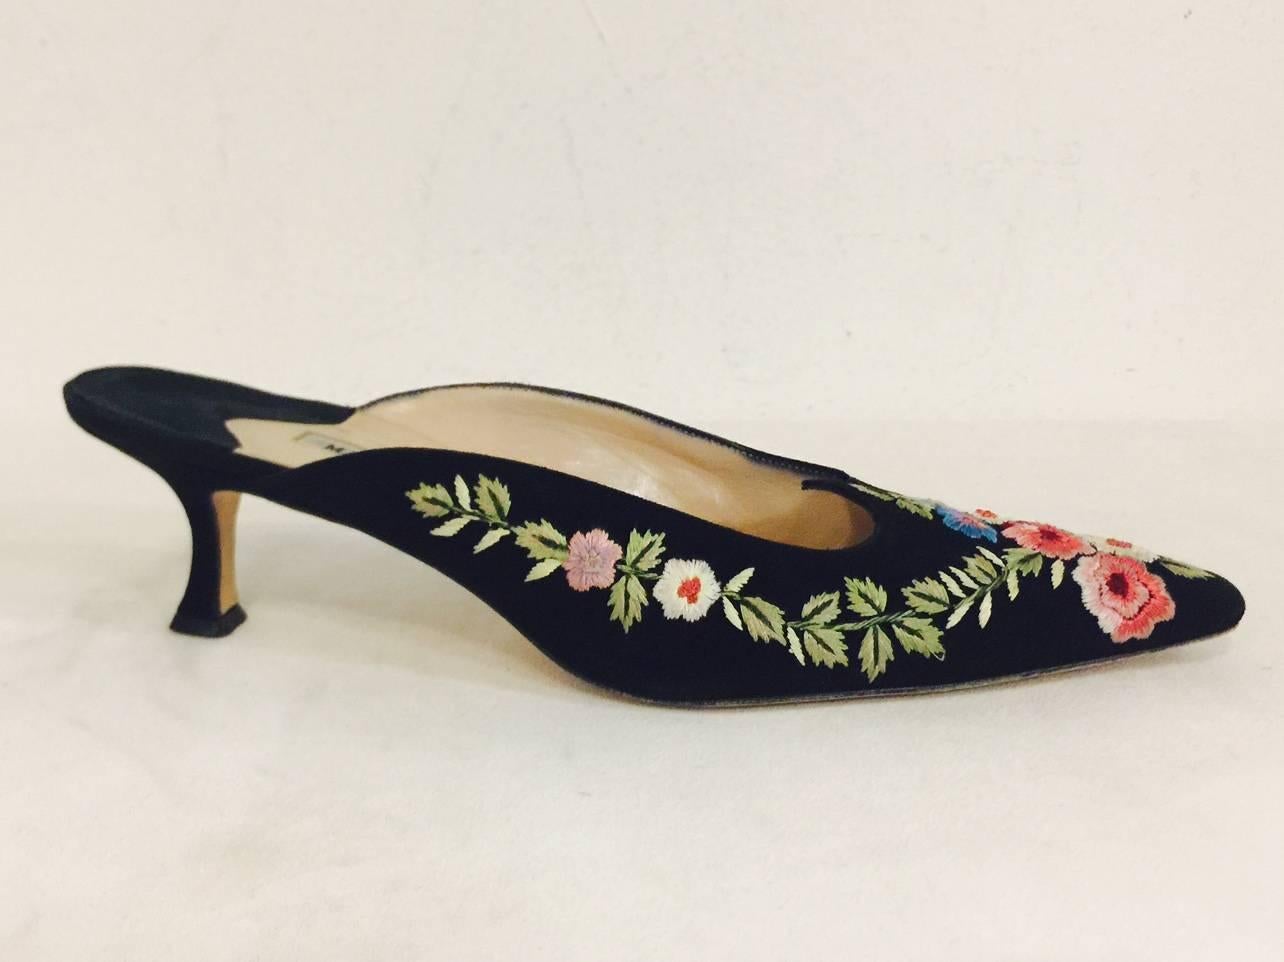 Evoking the grand palaces of the Ottoman Empire, these Manolo Blahnik Black Suede Mules are an investment in international style!  Features pointed toes, leather soles, insoles and lining.  The piece de resistance?  An unforgettable exotic floral